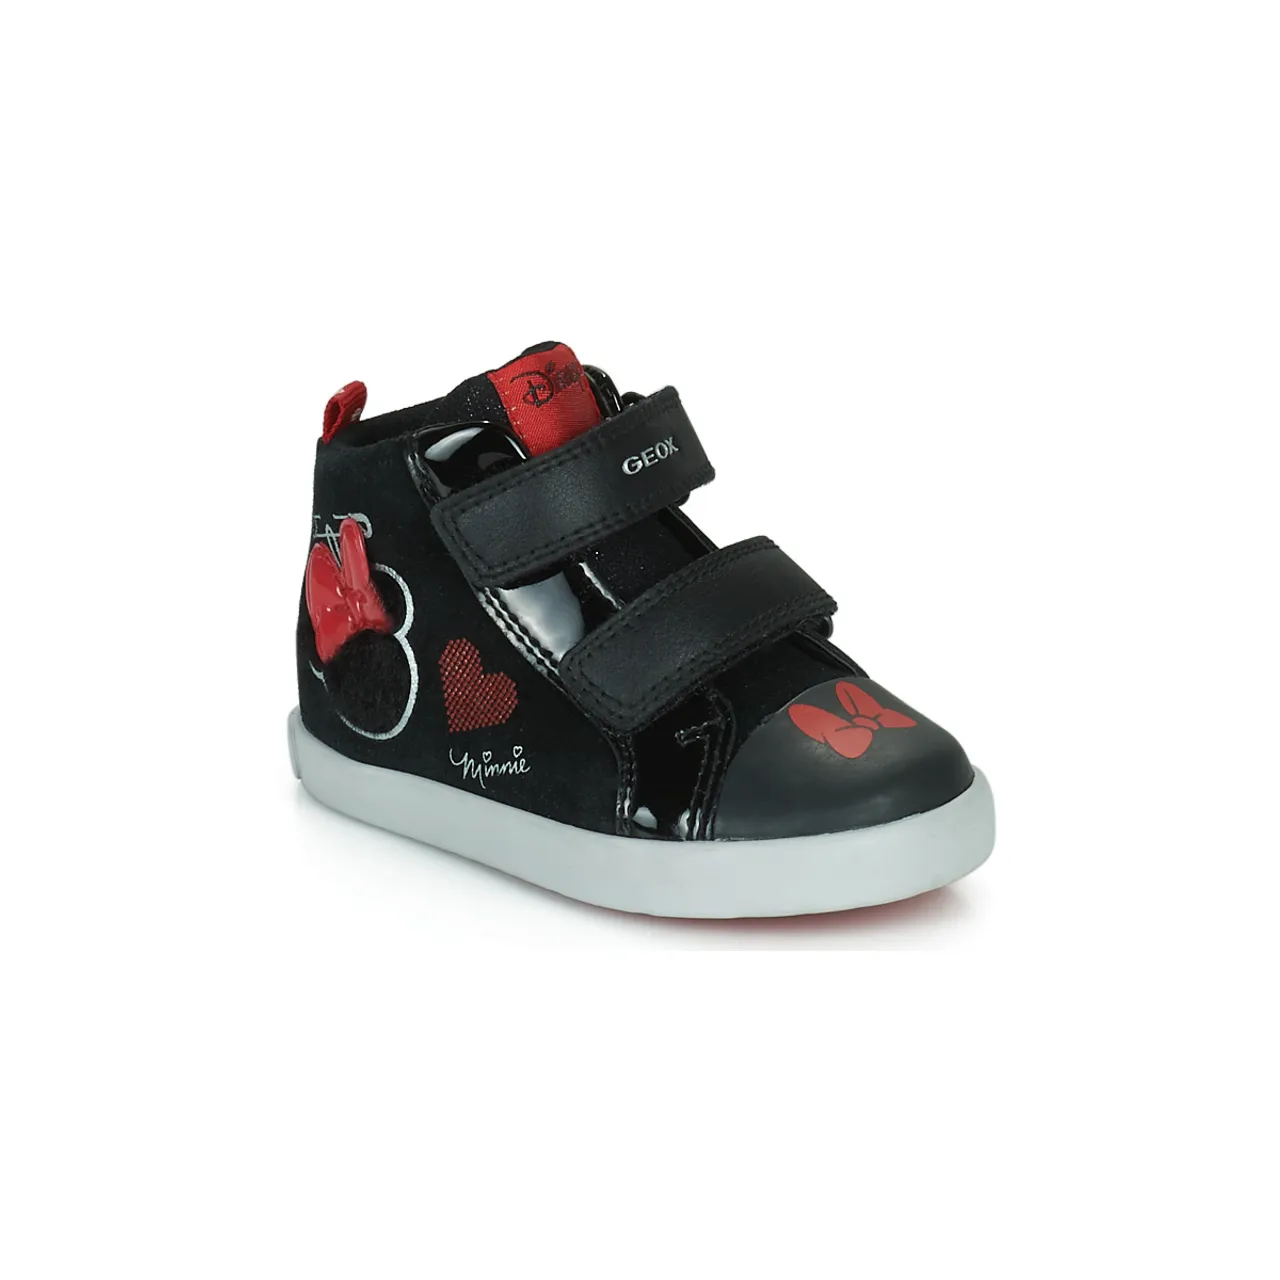 Geox  B KILWI GIRL D  girls's Children's Shoes (High-top Trainers) in Black